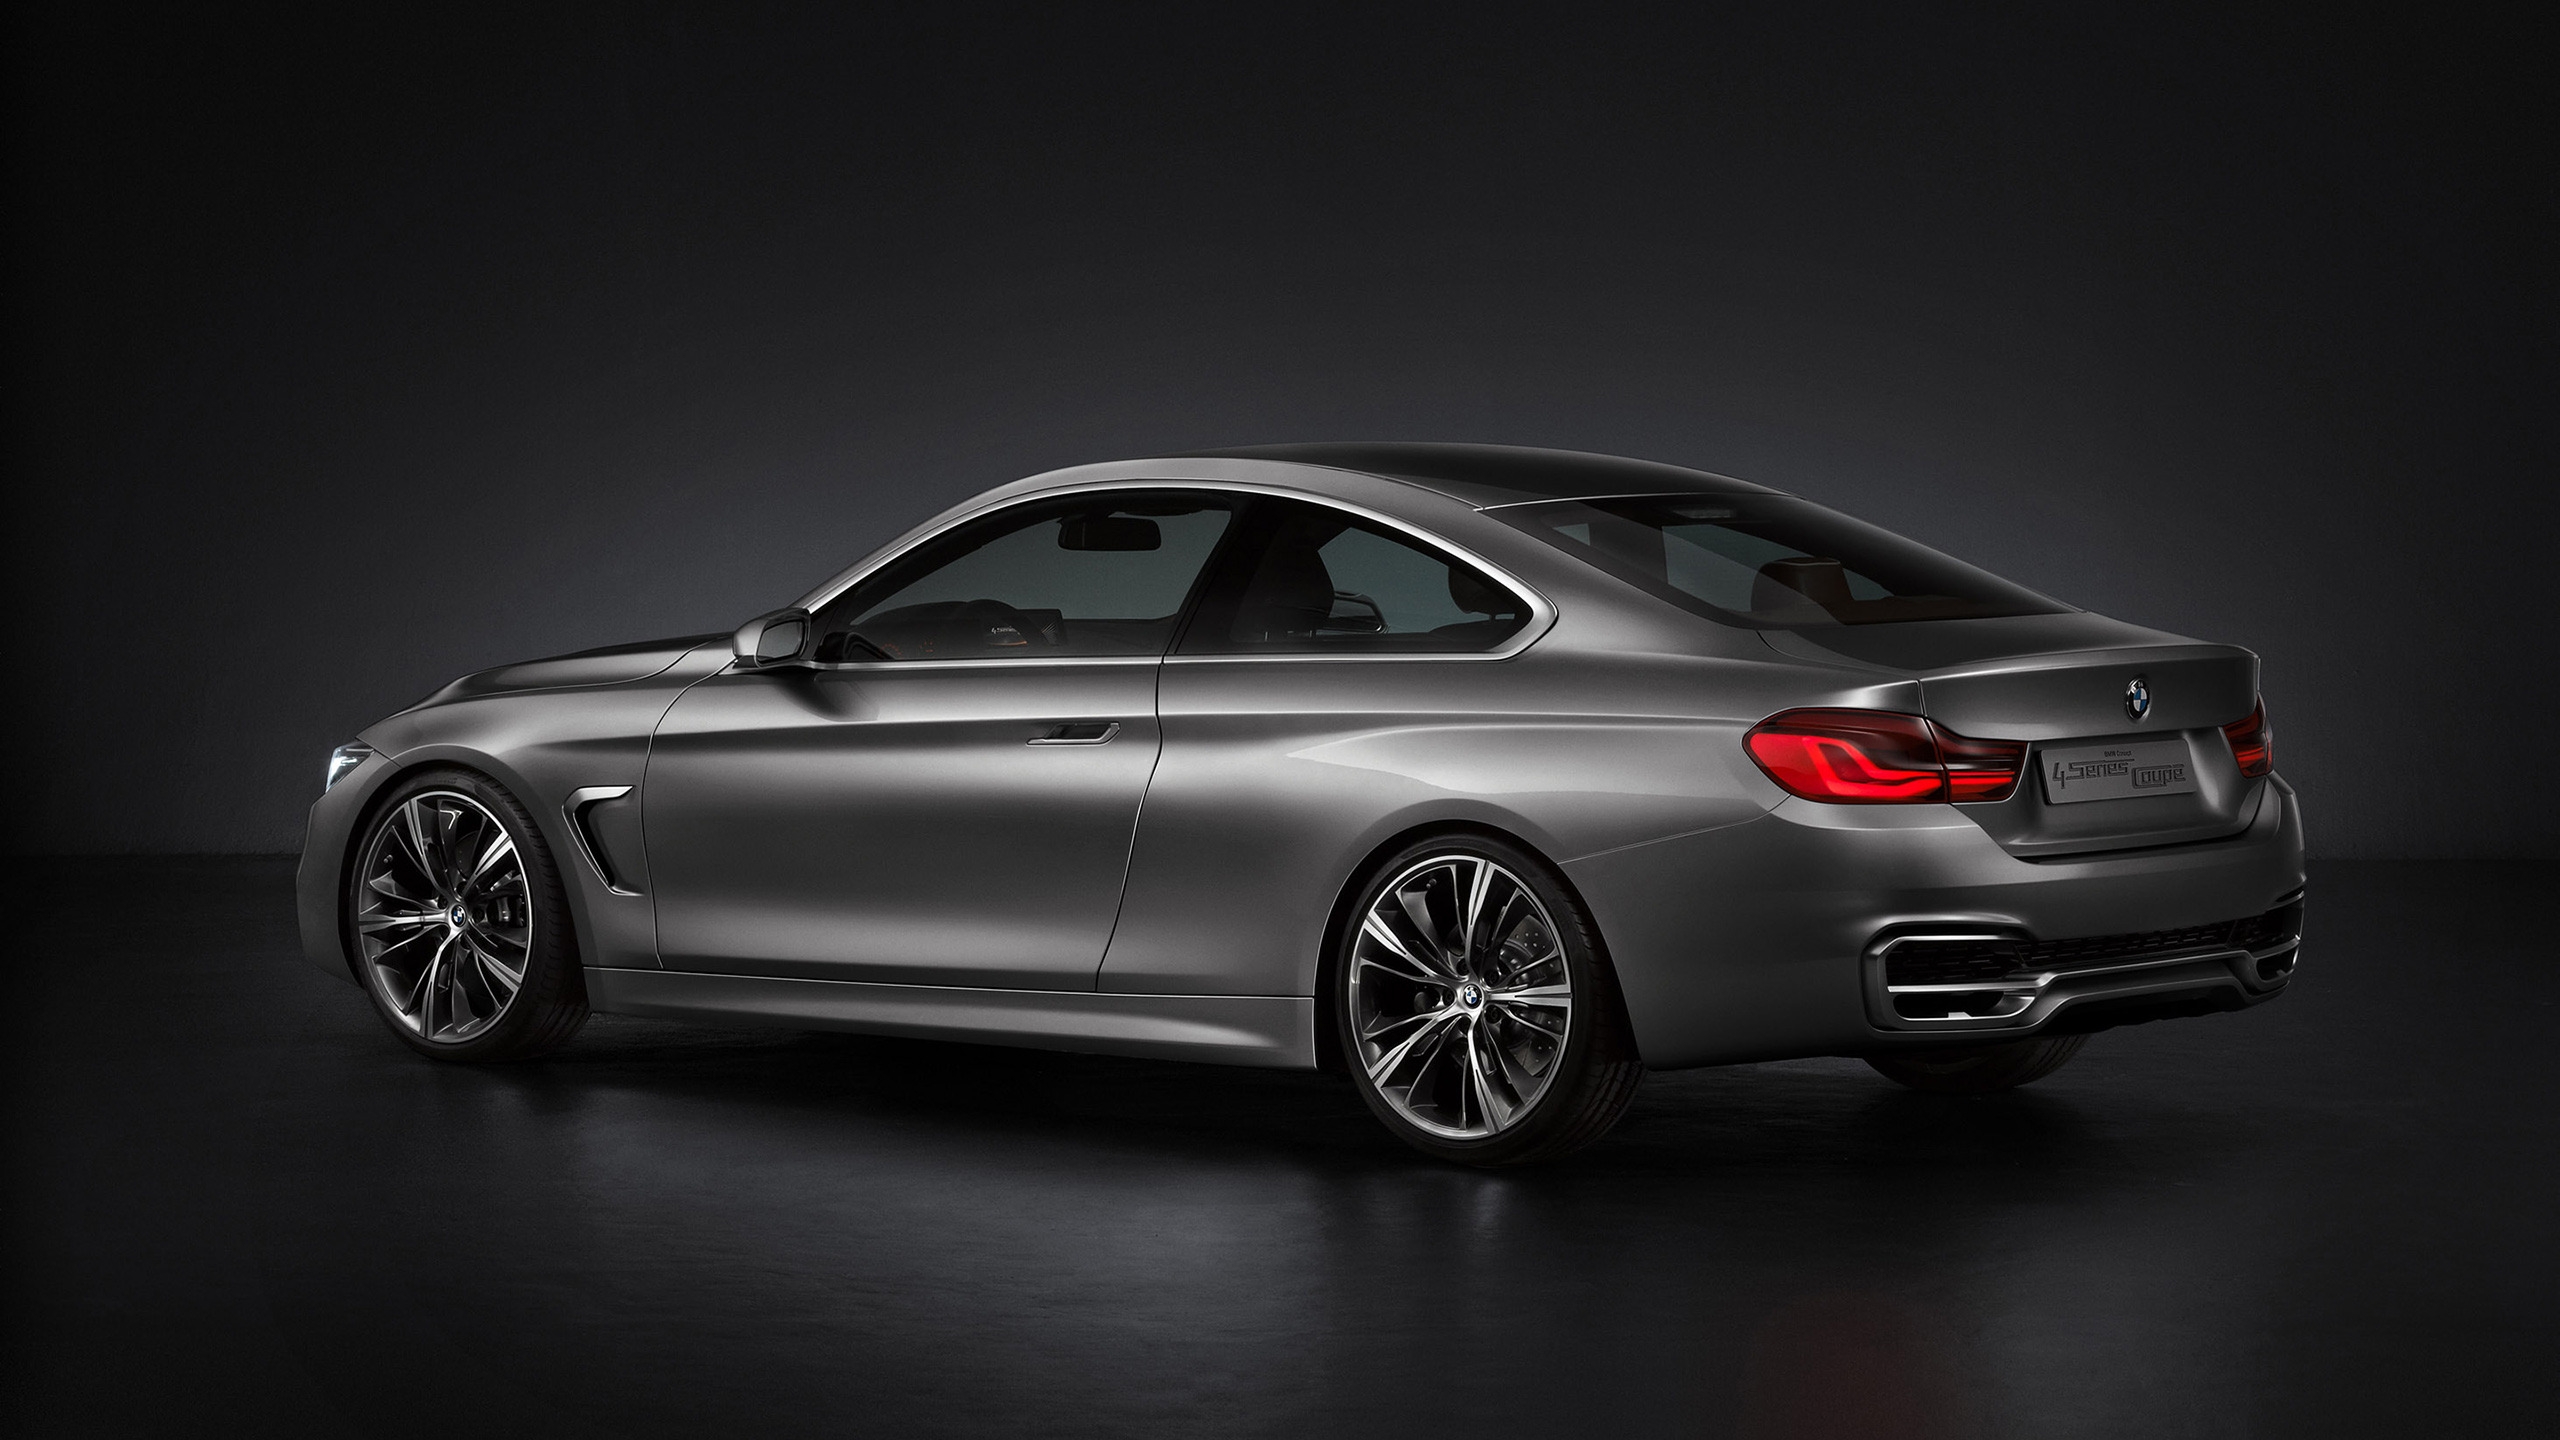 BMW 4 Series Coupe Concept Rear Studio for 2560x1440 HDTV resolution